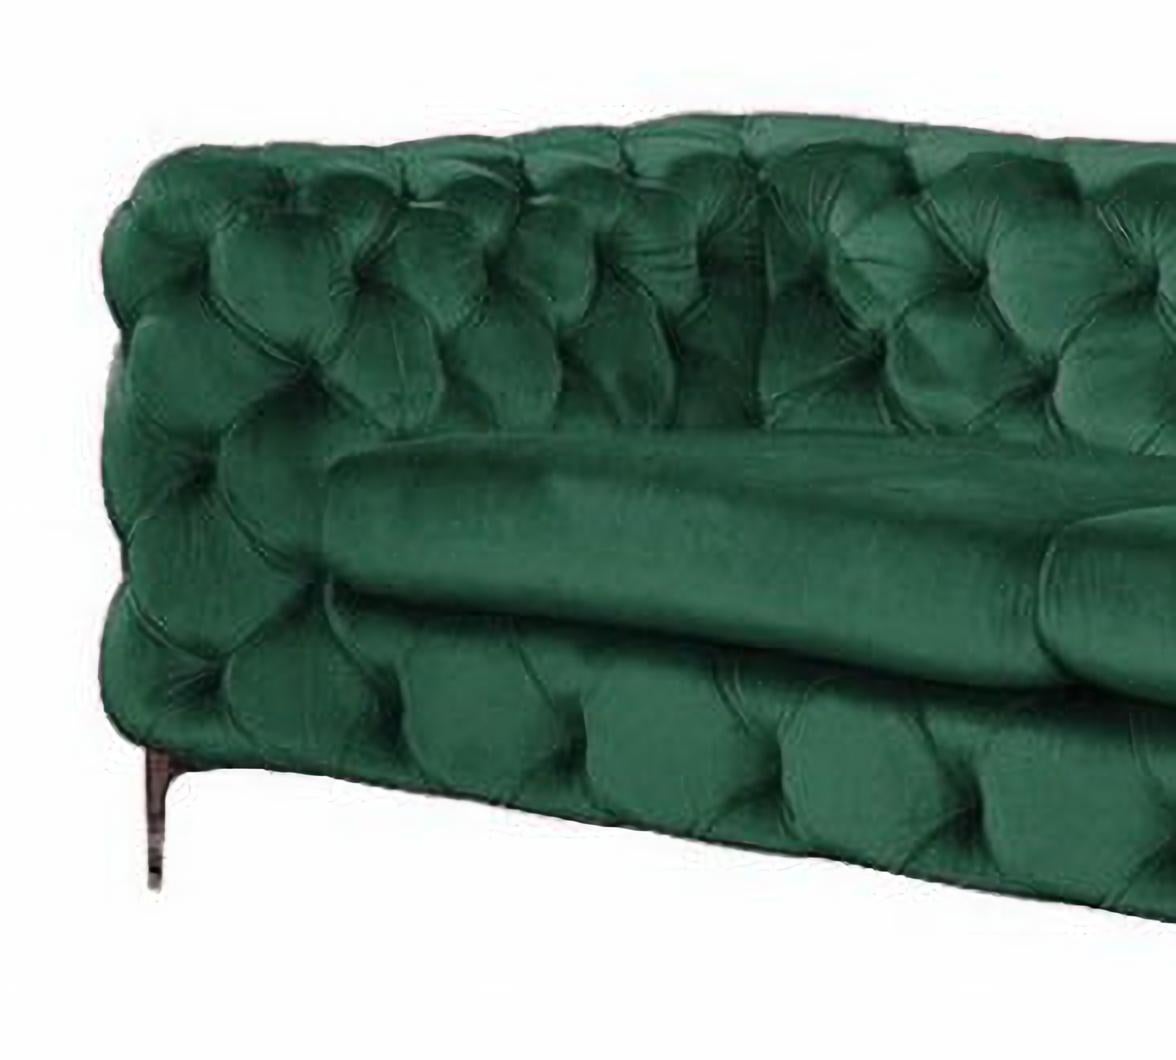 Chester 3 seater sofa, green velvet new.

Data sheet:

-Design sofa, 3 seats.

-Made with solid wooden structure.

-High-density polyurethane foam.

-Upholstered in green velvet

-Chrome metal legs.

-Other colors available.

-